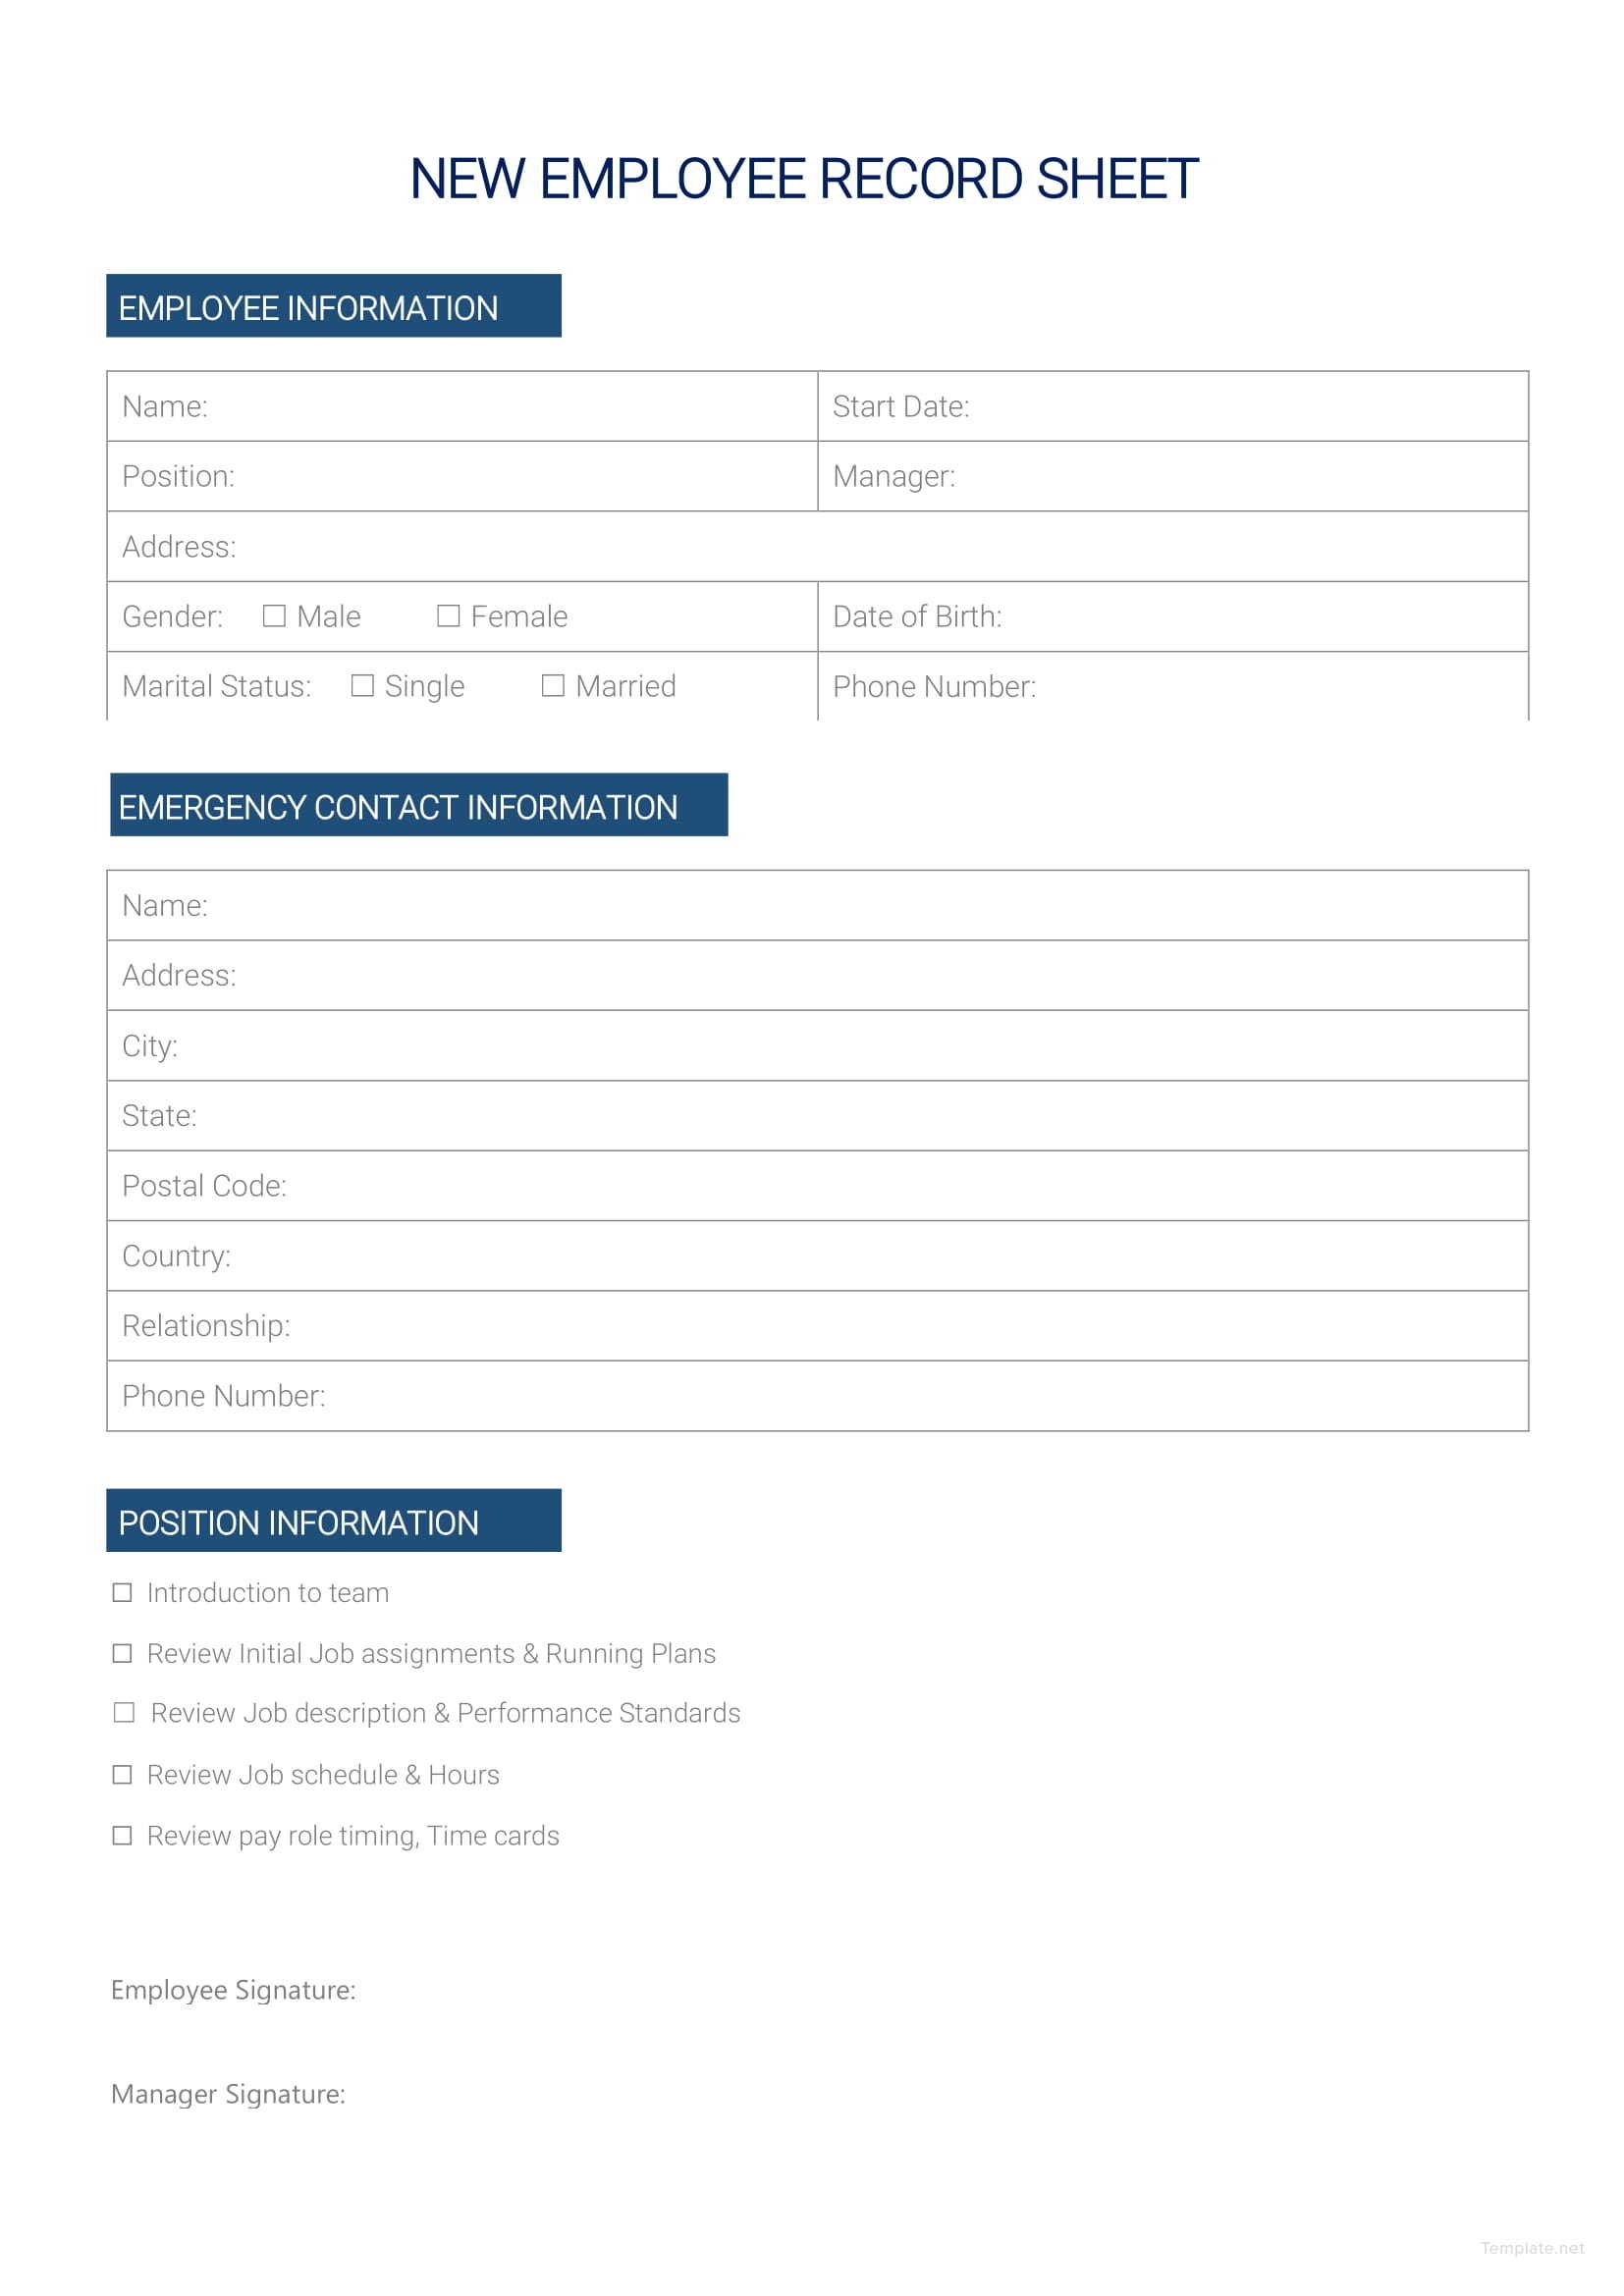 new-employee-record-sheet-template-in-microsoft-word-template